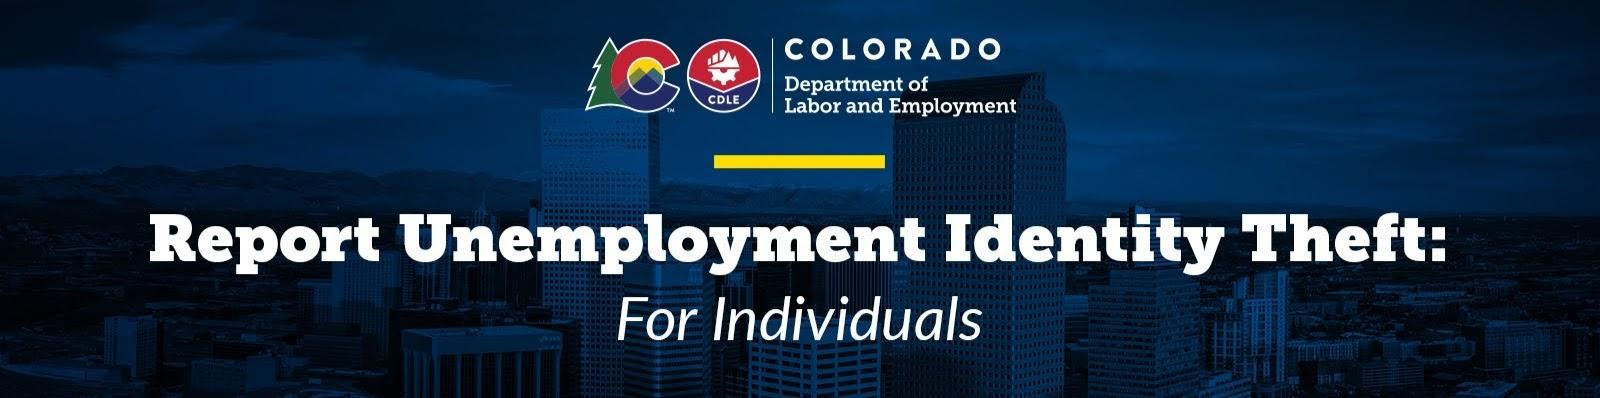 Colorado Department of Labor and Employment Logo with form title, "Report Unemployment Identity Theft"